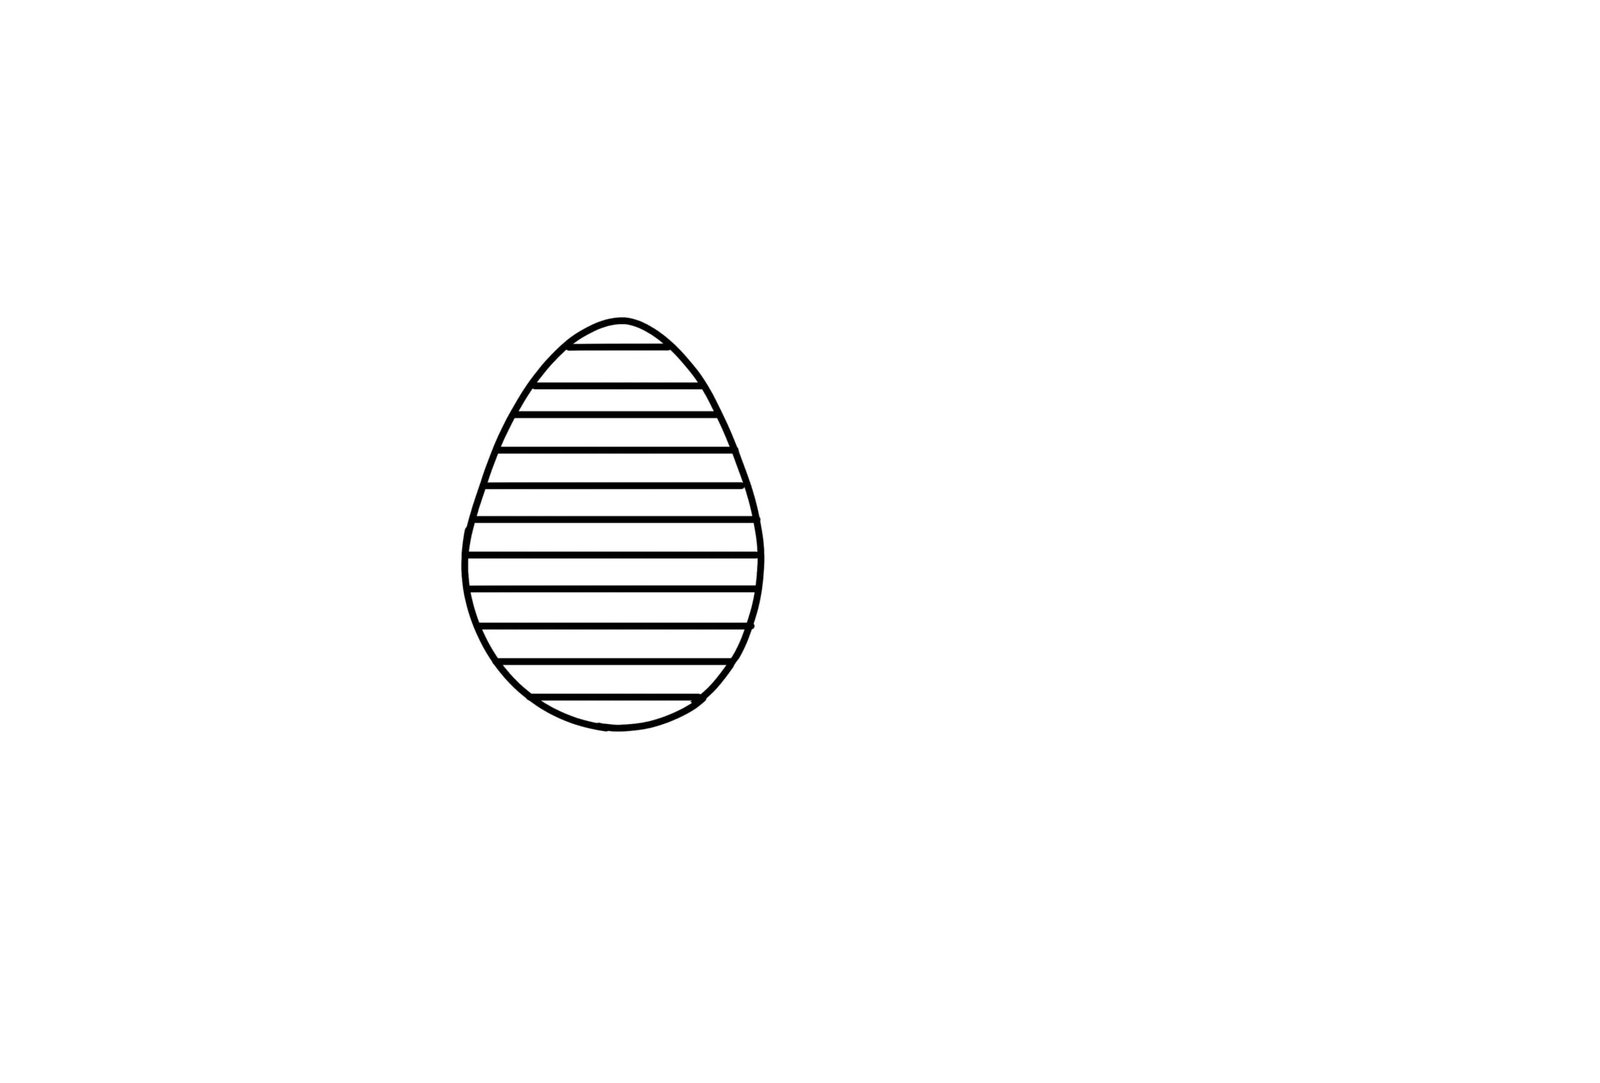 Easter Egg With Spiral Pattern Coloring Page